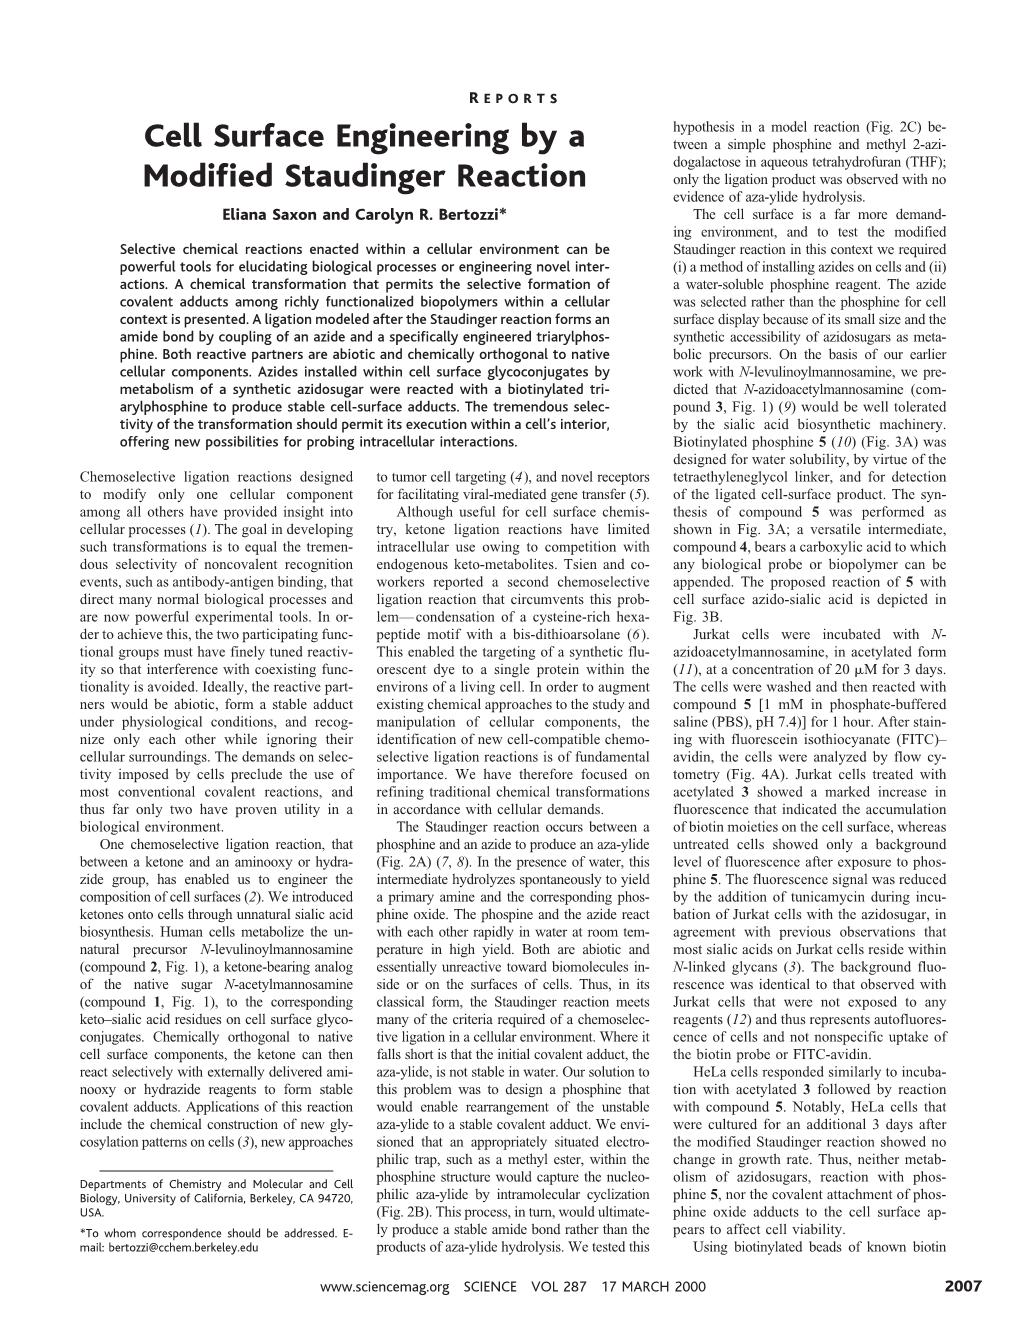 Cell Surface Engineering by a Modified Staudinger Reaction